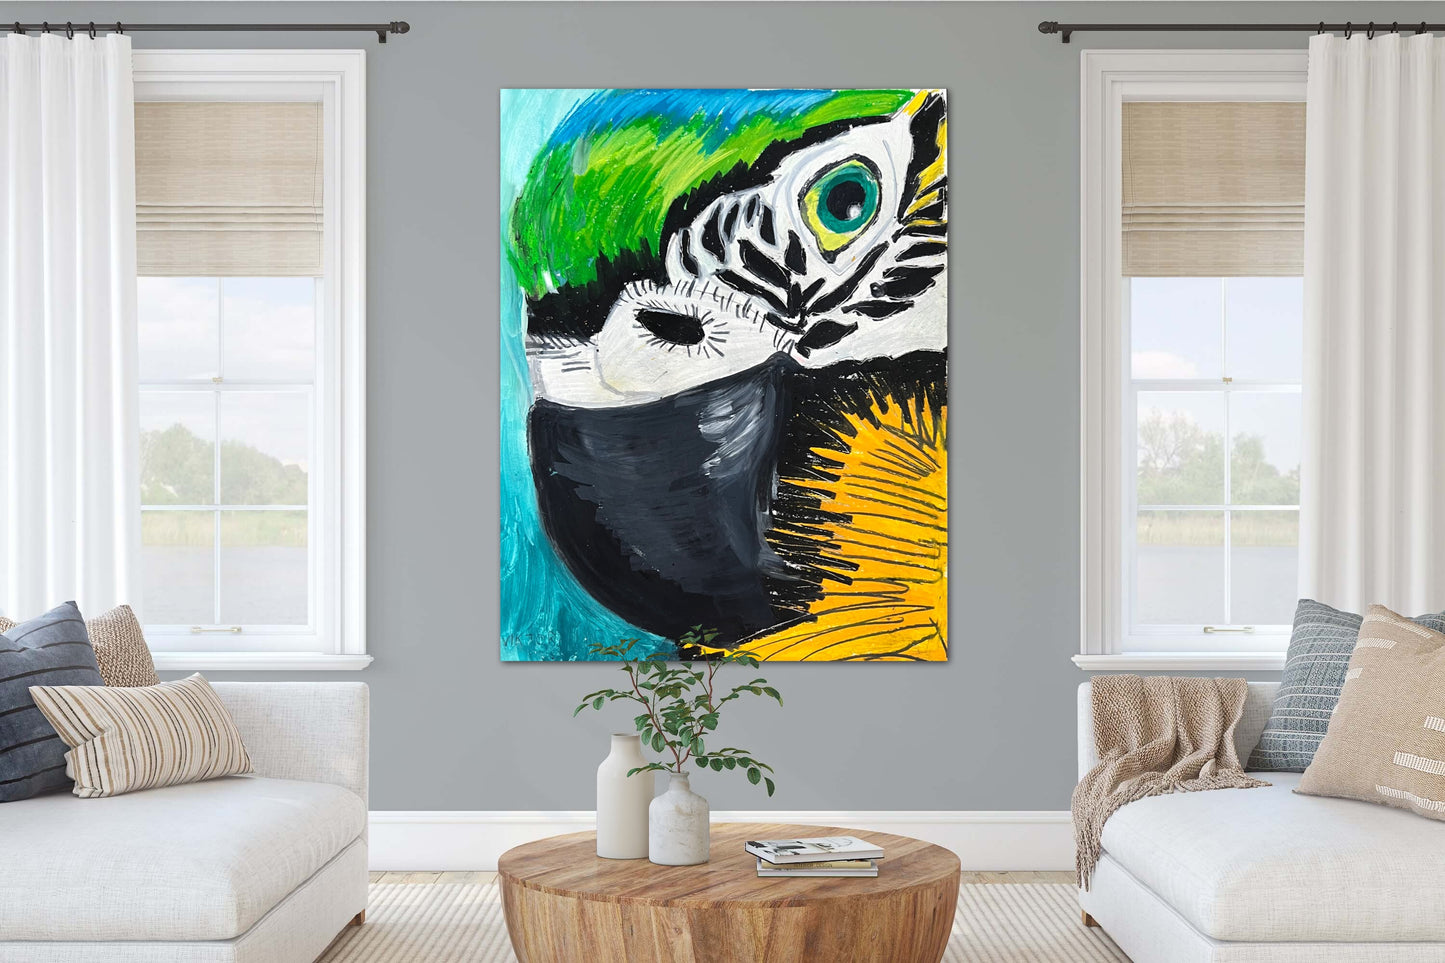 The Parrot Collection: Parrot 1 - fine prints and canvas prints in more size